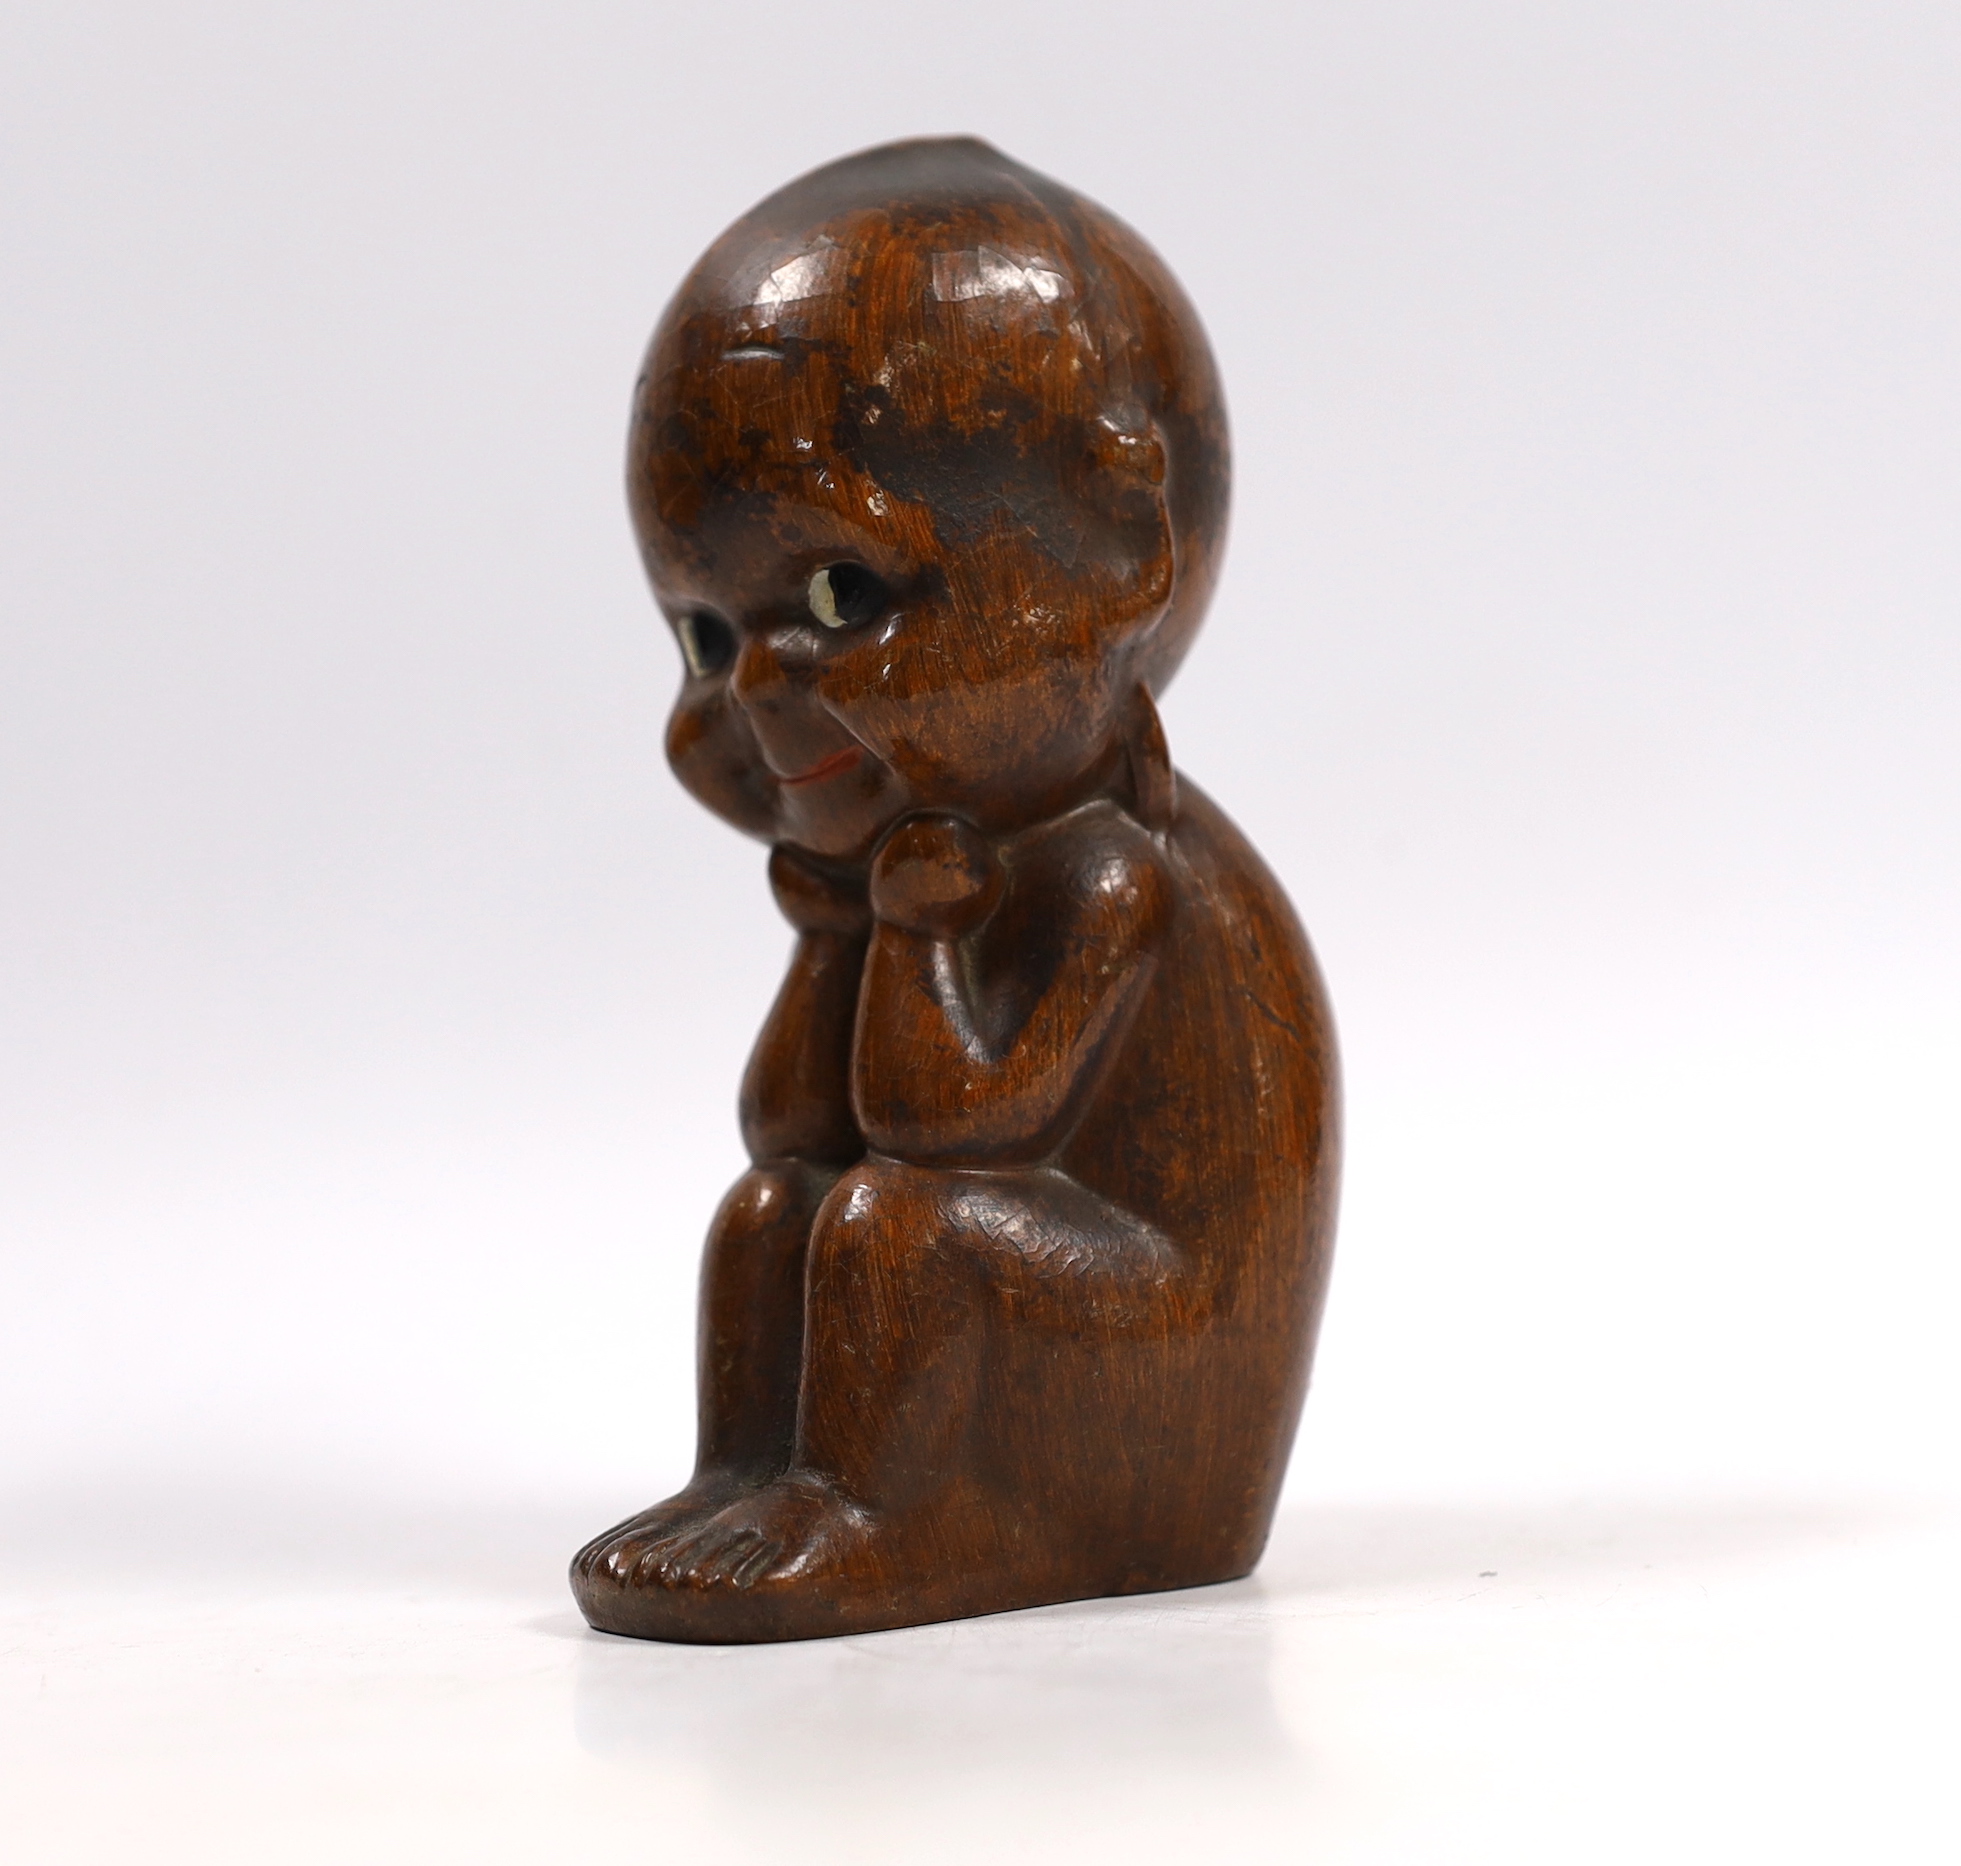 A Kewpie composition figure with painted eyes, 14cm high